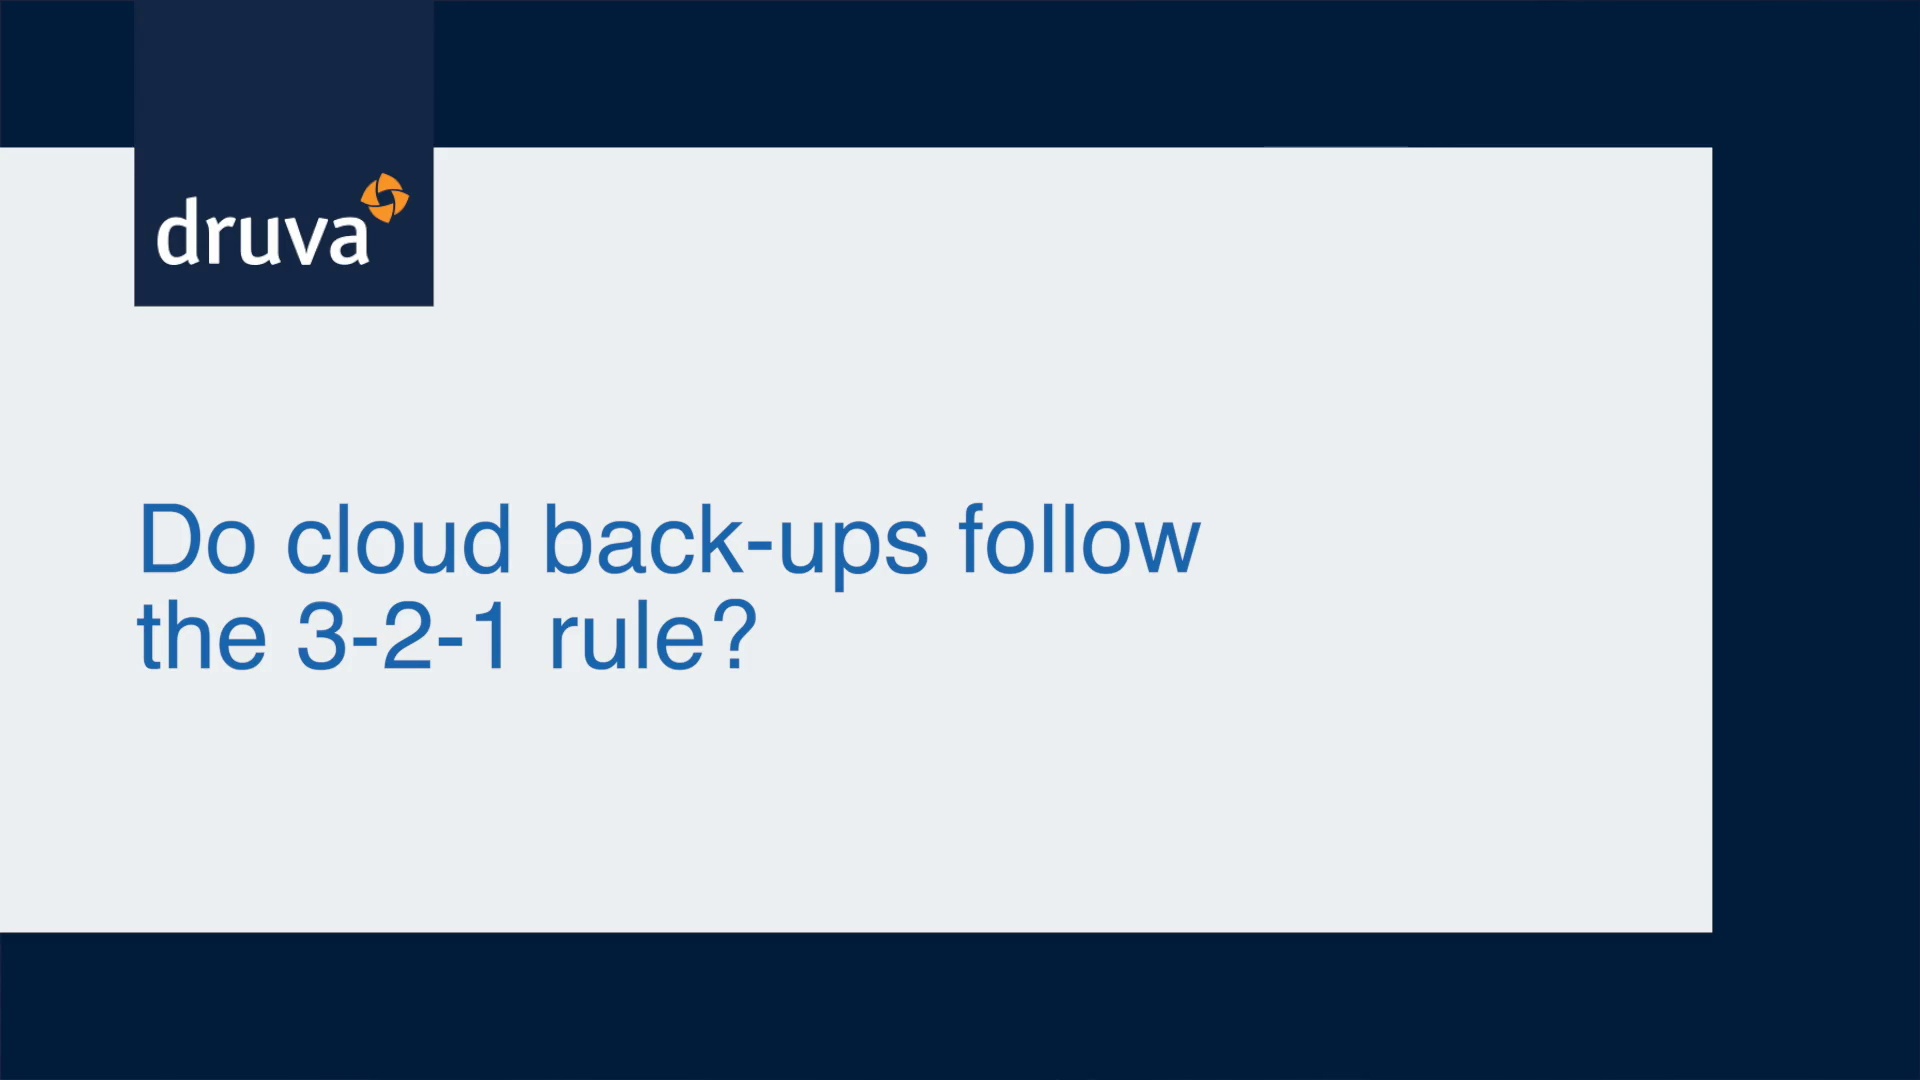 Does the 3-2-1 rule apply to cloud backups?